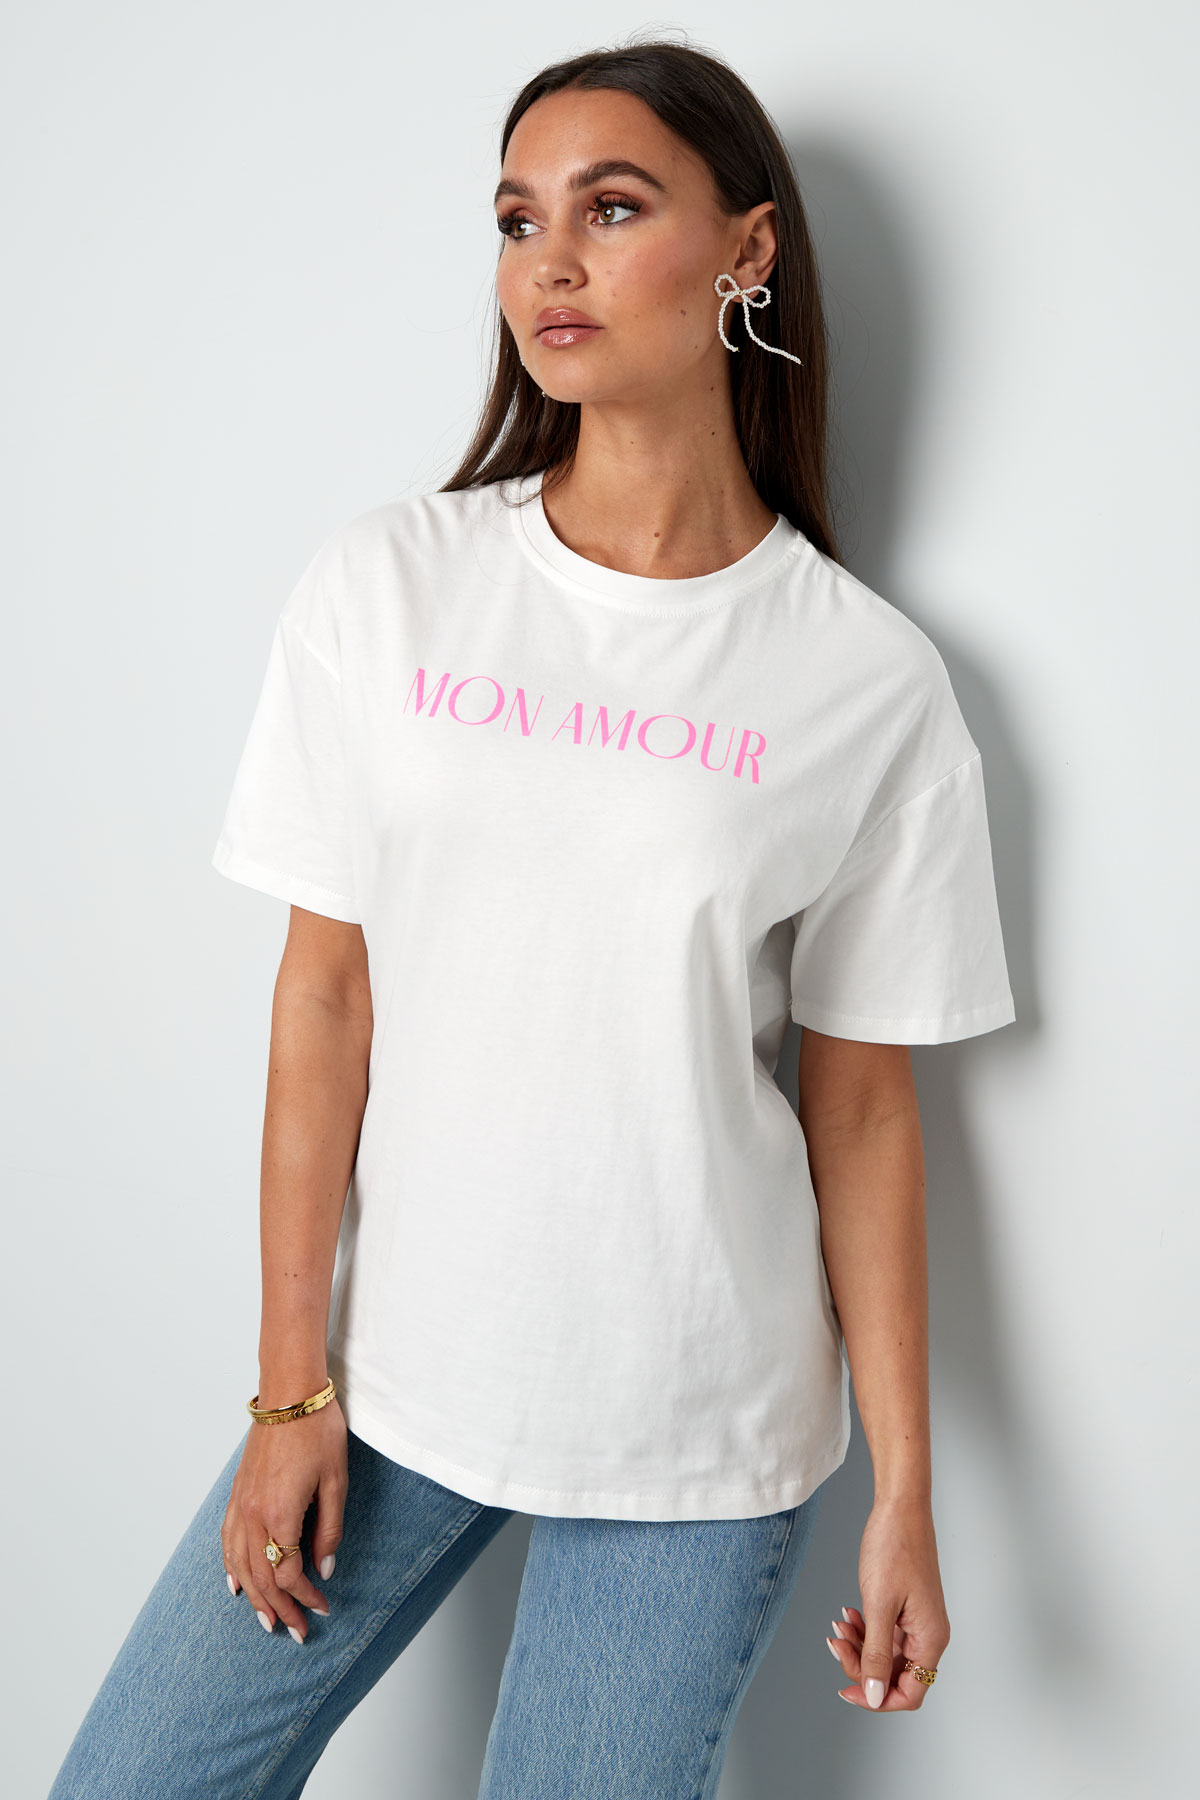 T-shirt mon amour - wit h5 Afbeelding4